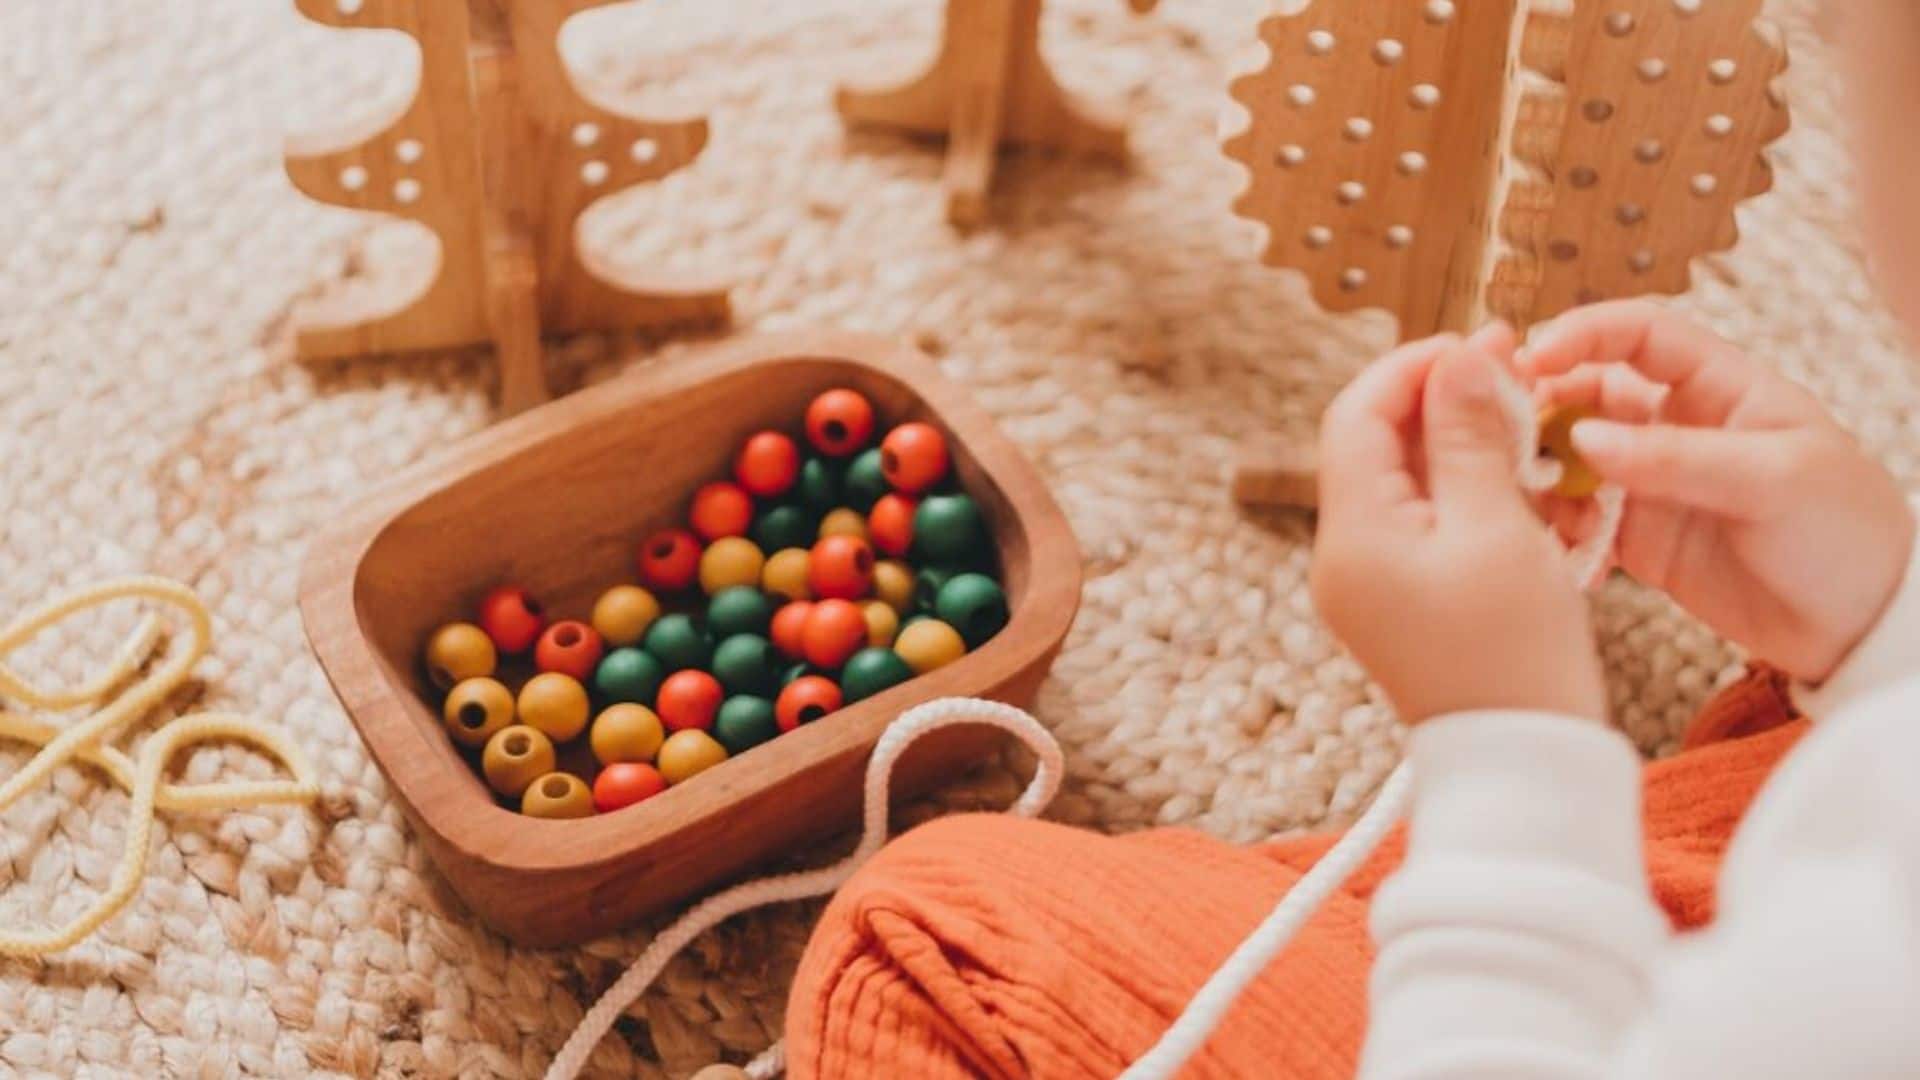 A child threads a rope through a bead with a wooden bowl of coloured wooden beads in the background